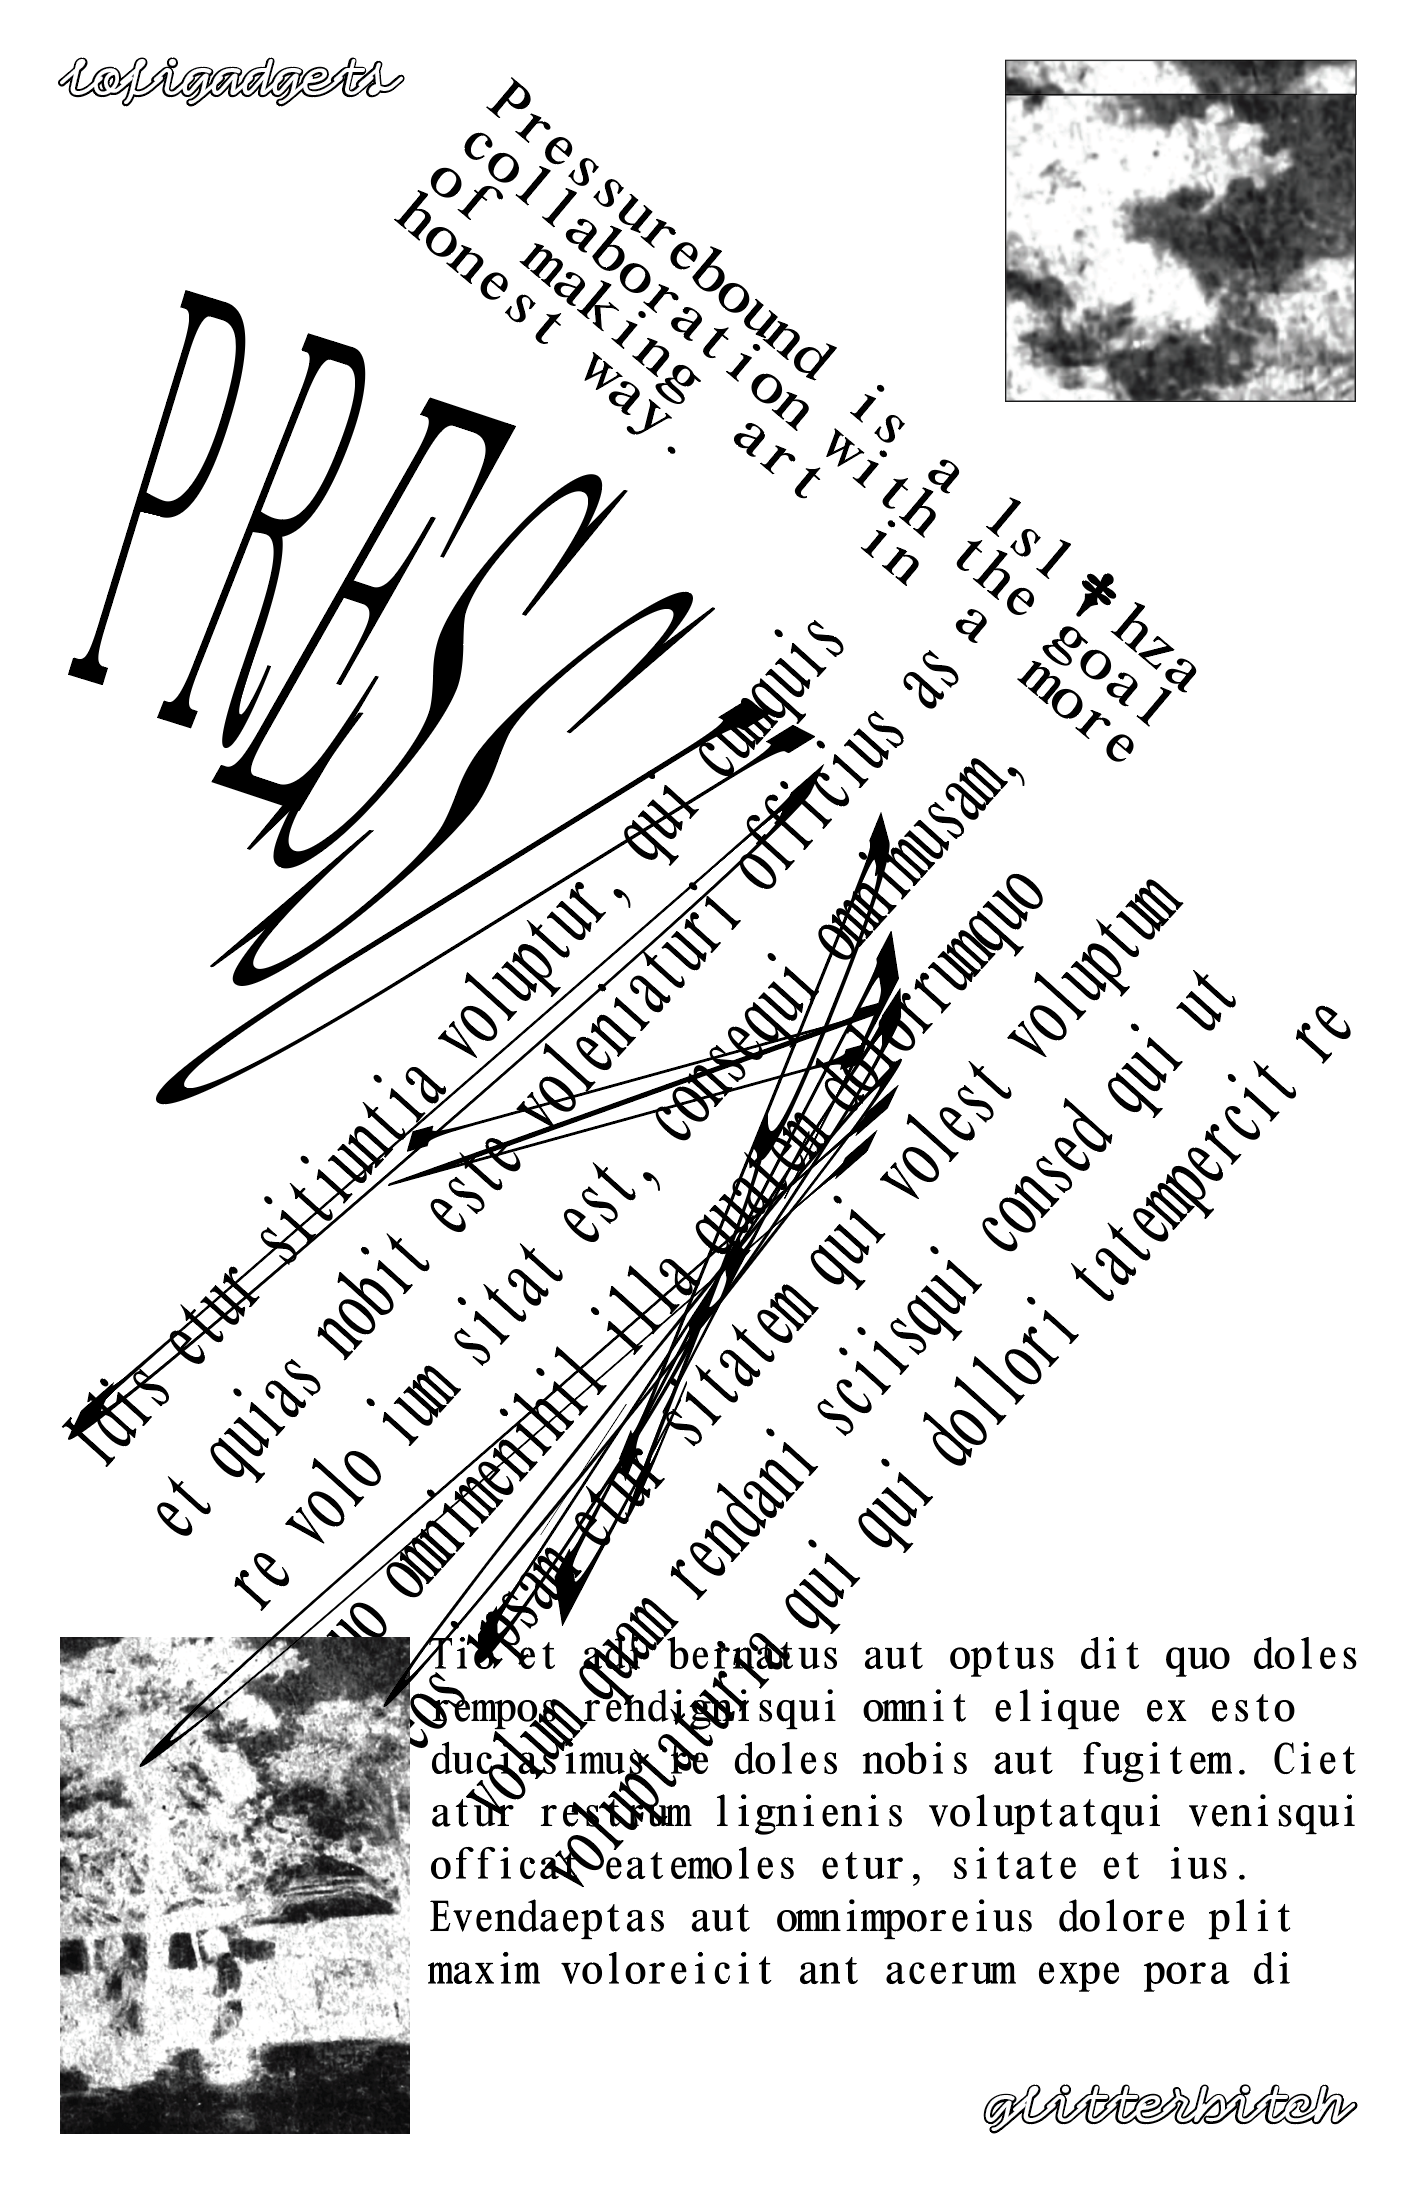 Screenshot of a draft of a poster, in black text/images on a white background. Two paragraphs of text sharply angled to form a 7-like diagonal composition, of which the uppermost paragraph reads 'Pressurebound is a lsl & hza collaboration with the goal of making art in a more honest way'. (The & is replaced with a dagger symbol.) The word 'PRESSUREBOUND' stretched tall and narrow, each letter increasingly dramatically angled. At the top and bottom of the composition are snippets of an unidentifiable image and some filler text.